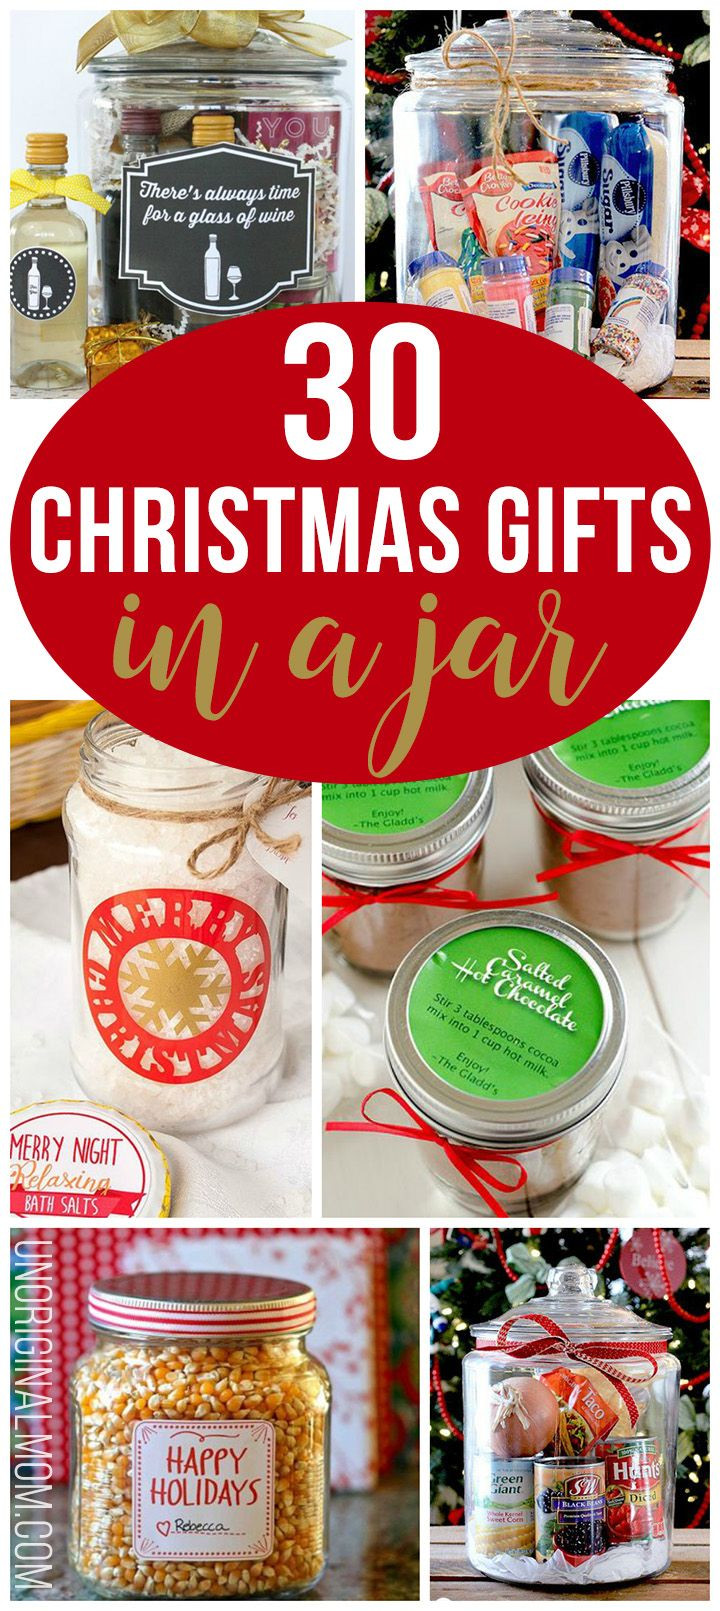 Cool Holiday Gift Ideas
 30 Christmas Gifts in a Jar